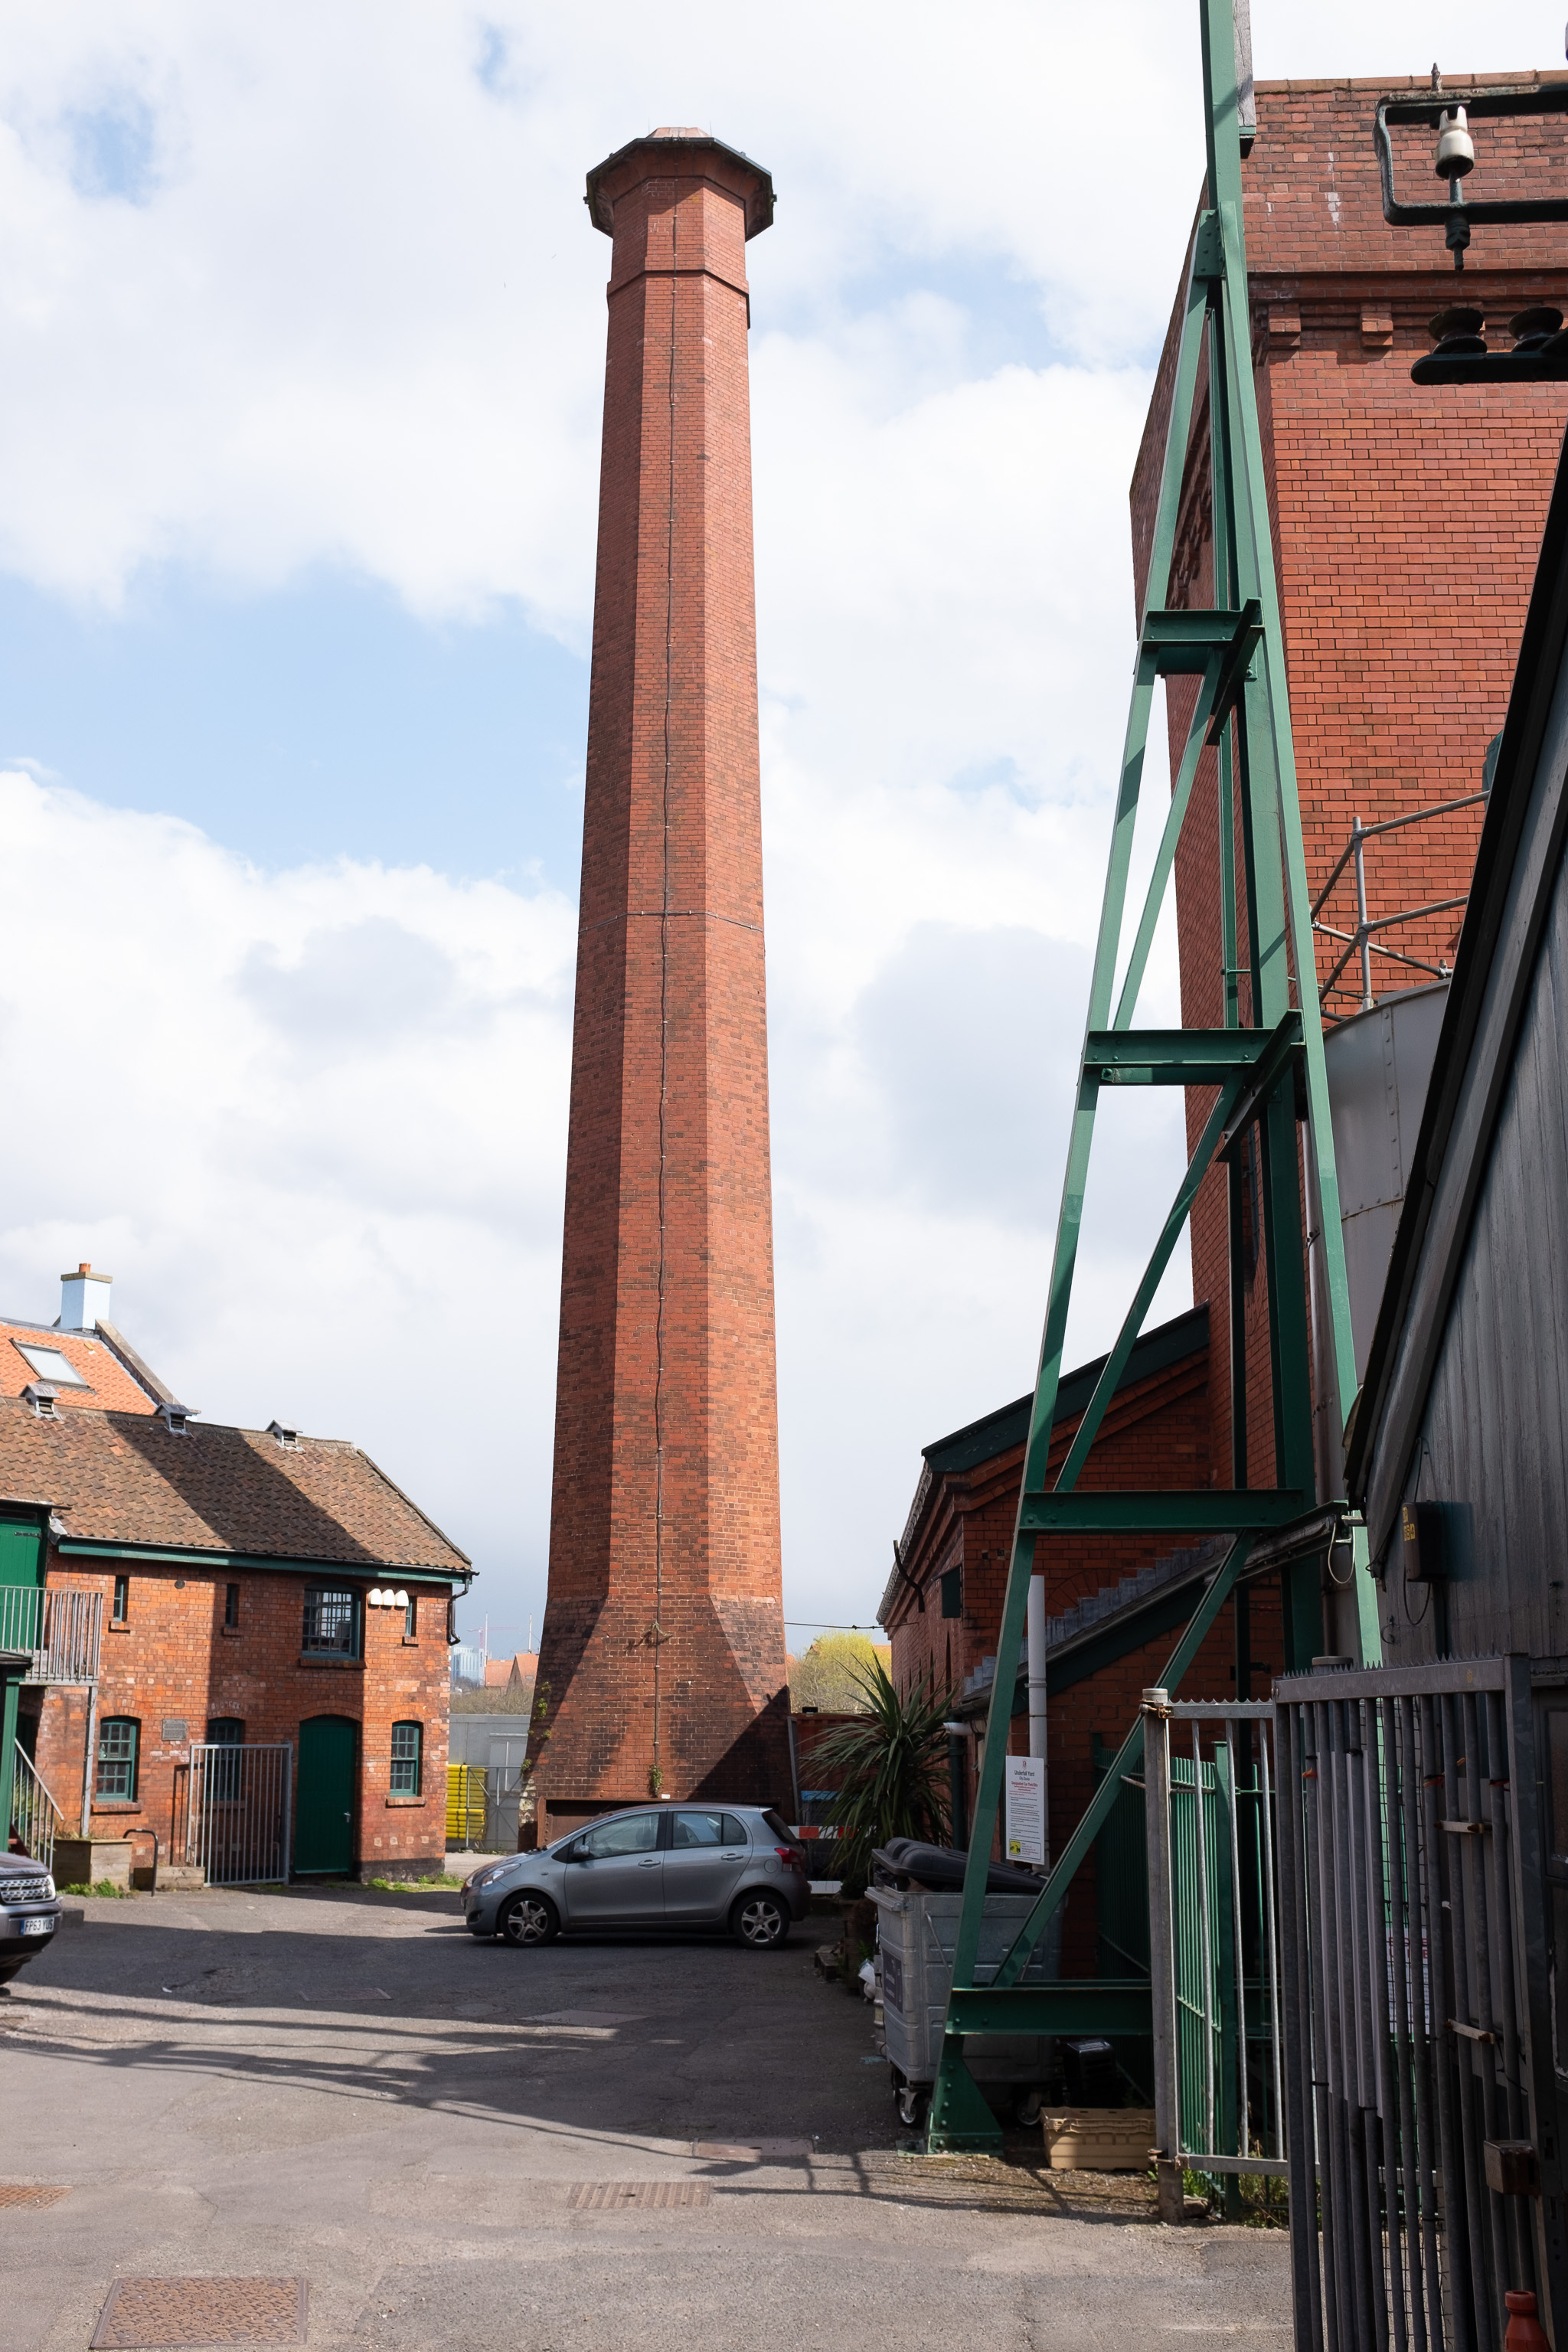 Chimney
Standing proud since 1888. Chimney of they hydraulic engine house.
